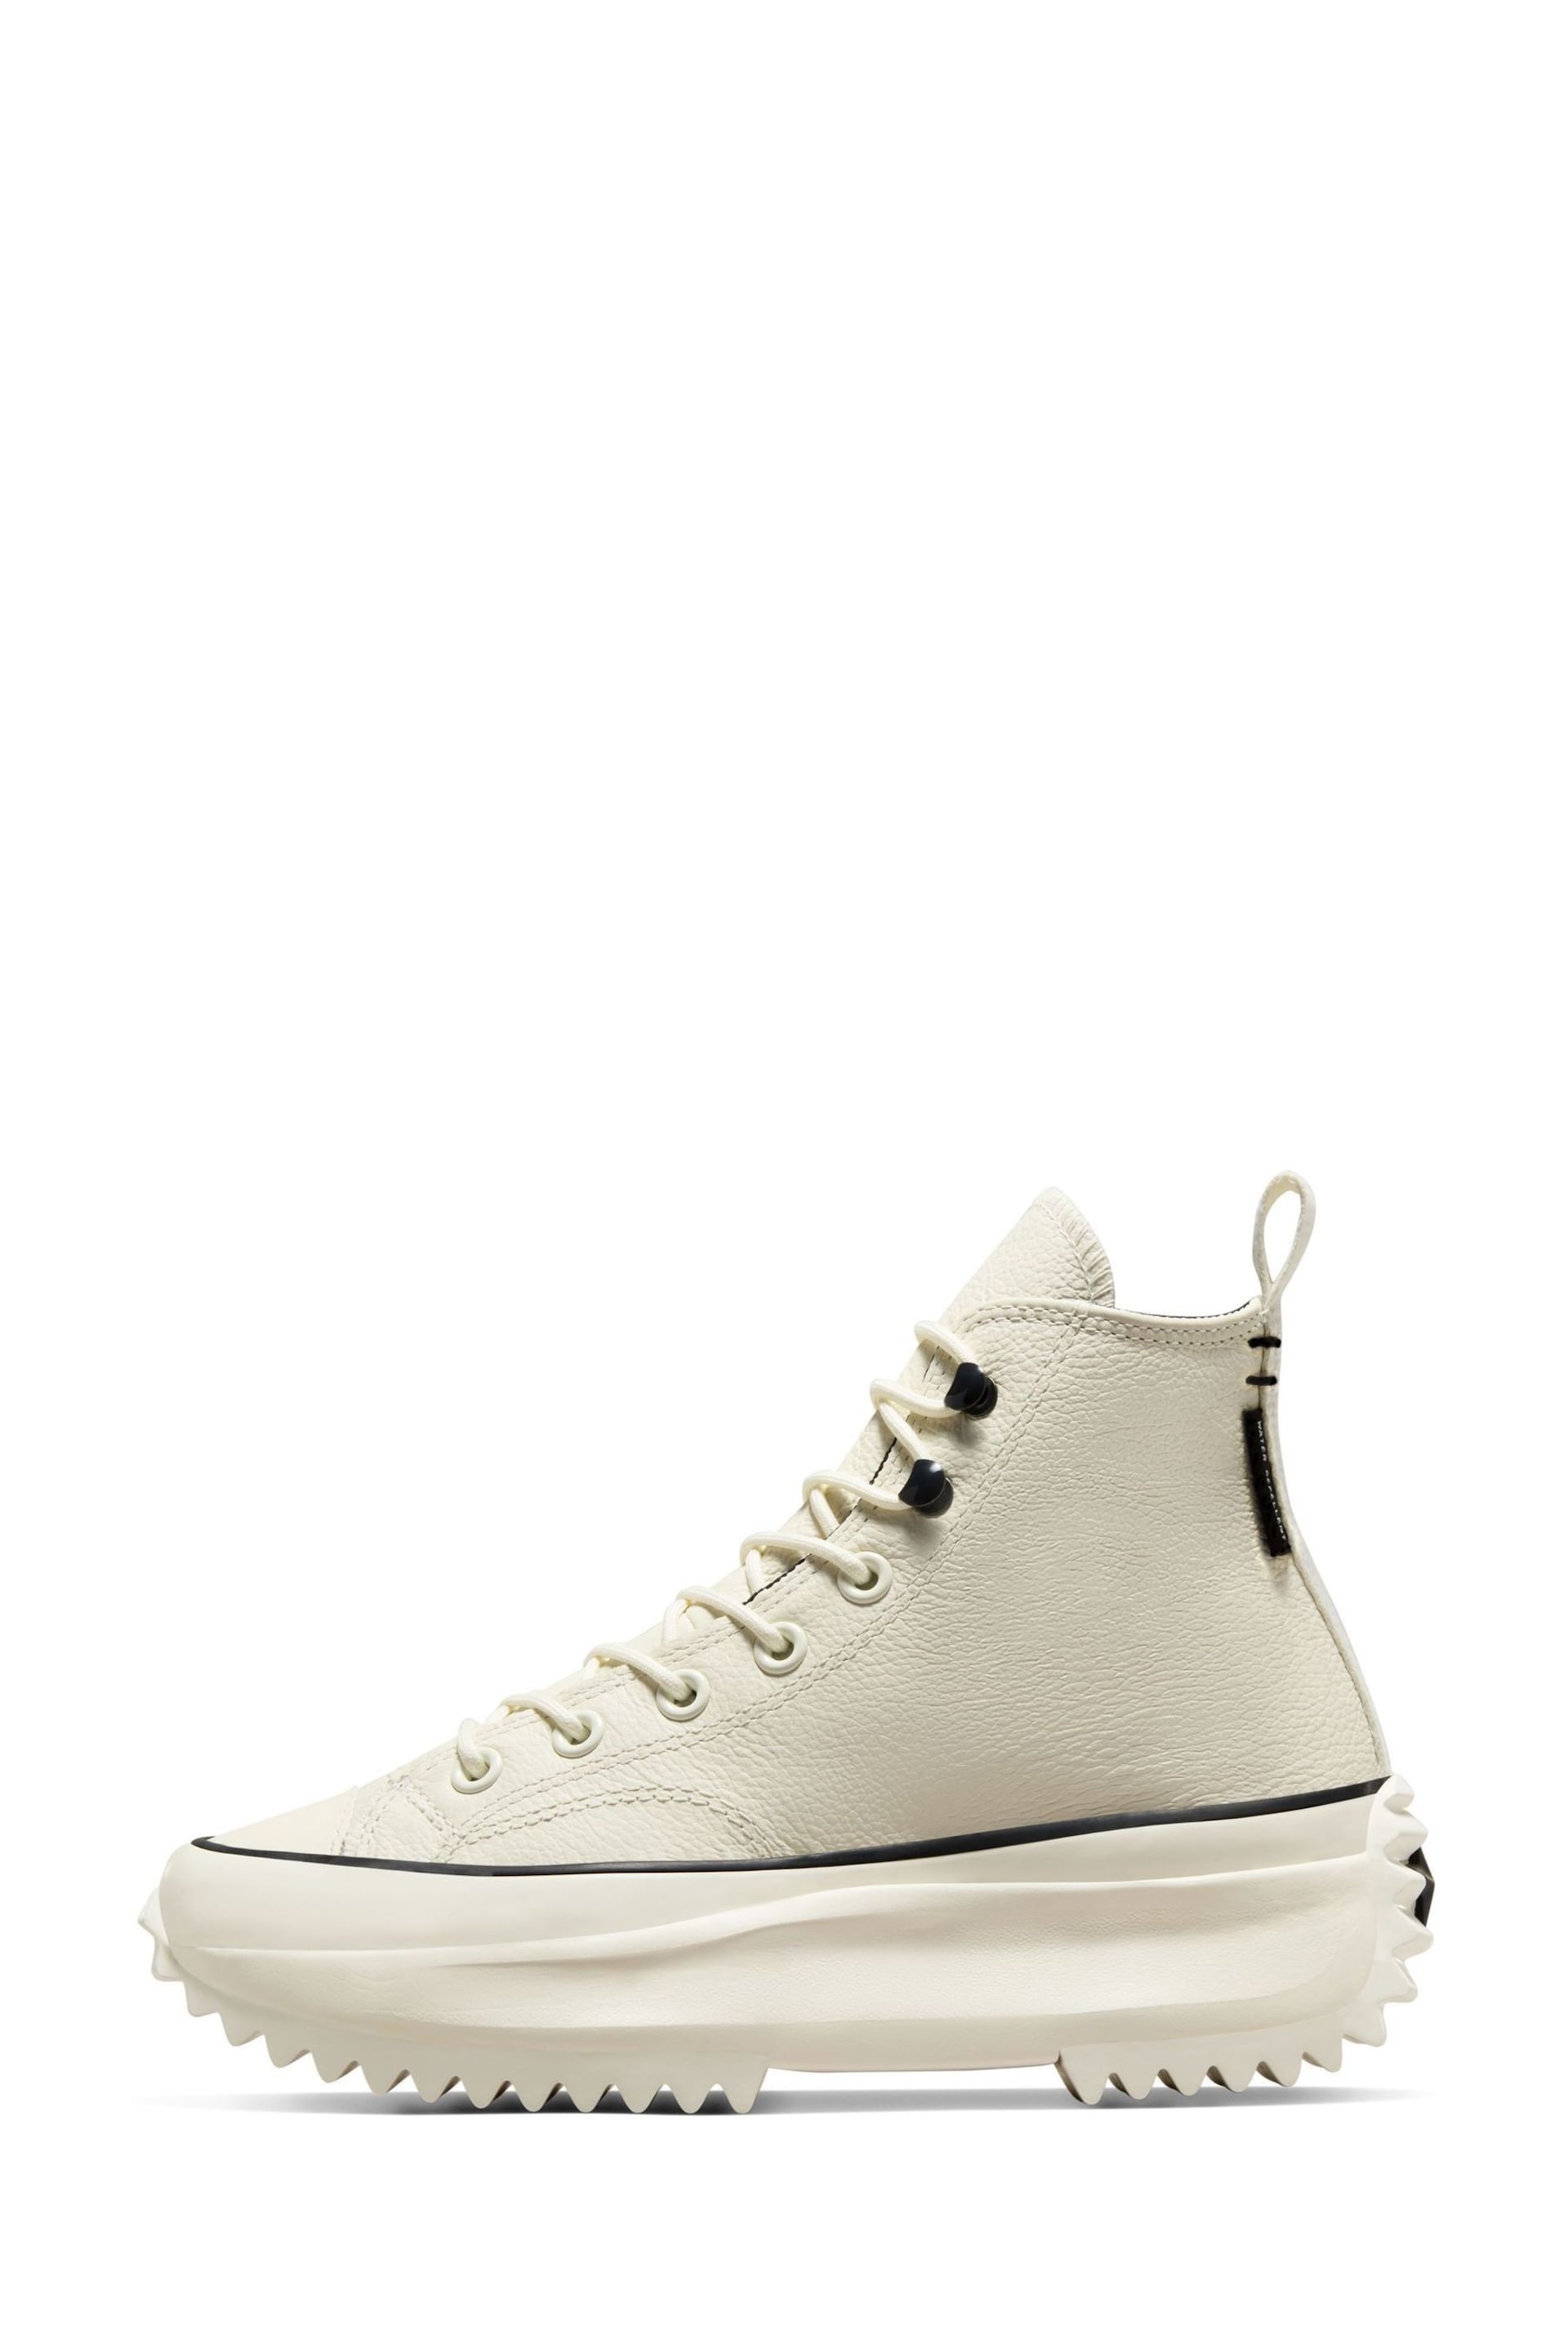 Converse Cream Leather Run Star Hike Trainers - Image 5 of 10